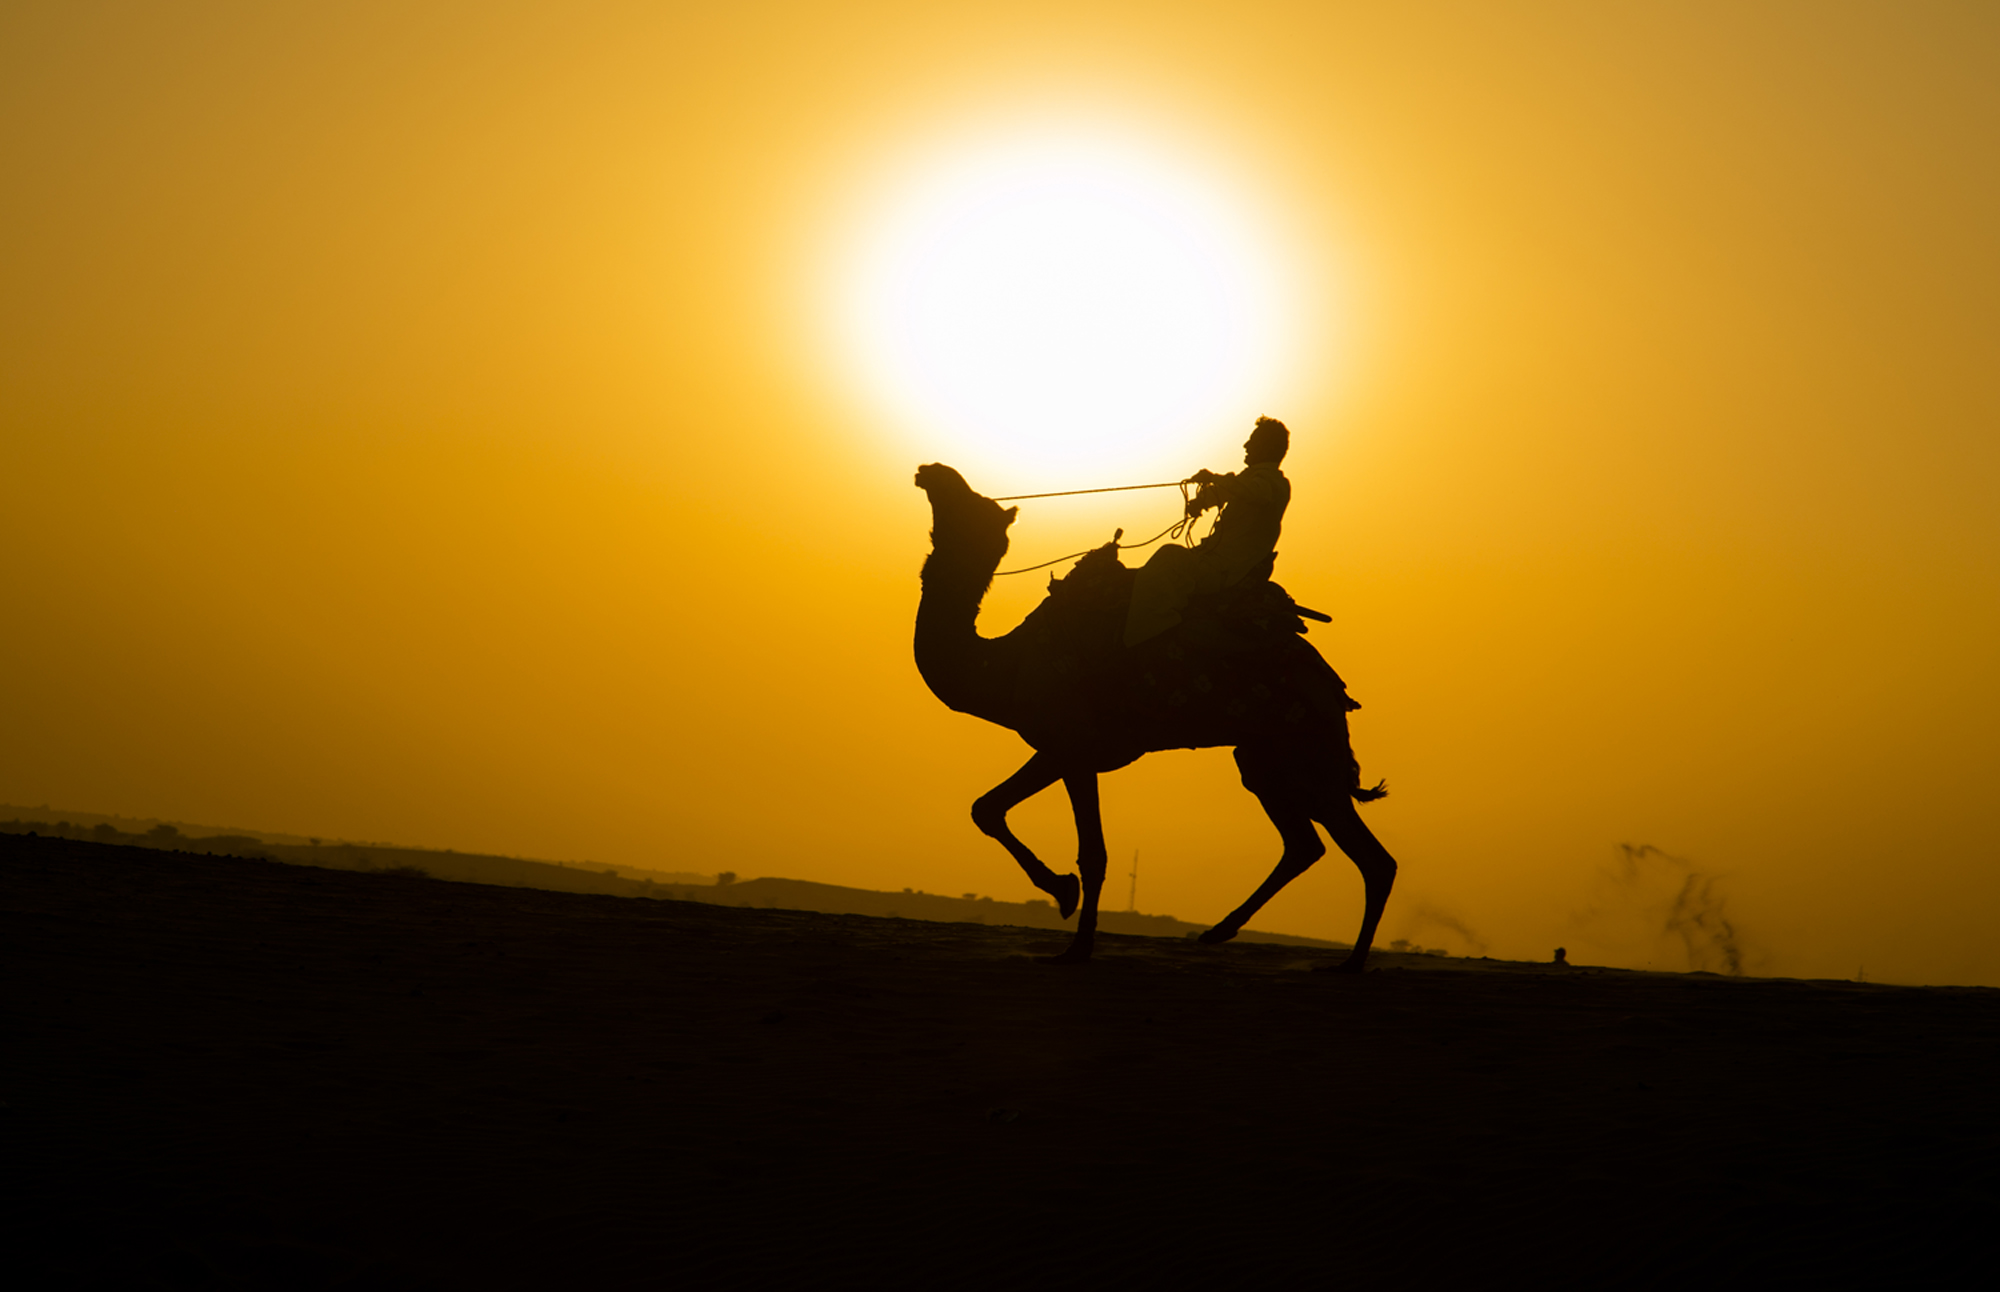 As the sun sets on the desert the fate of the camels is hanging in thin balance. Will the modernisation is rural India mean an end to the magic of the beautiful beasts - The Ship of the Dessert ?